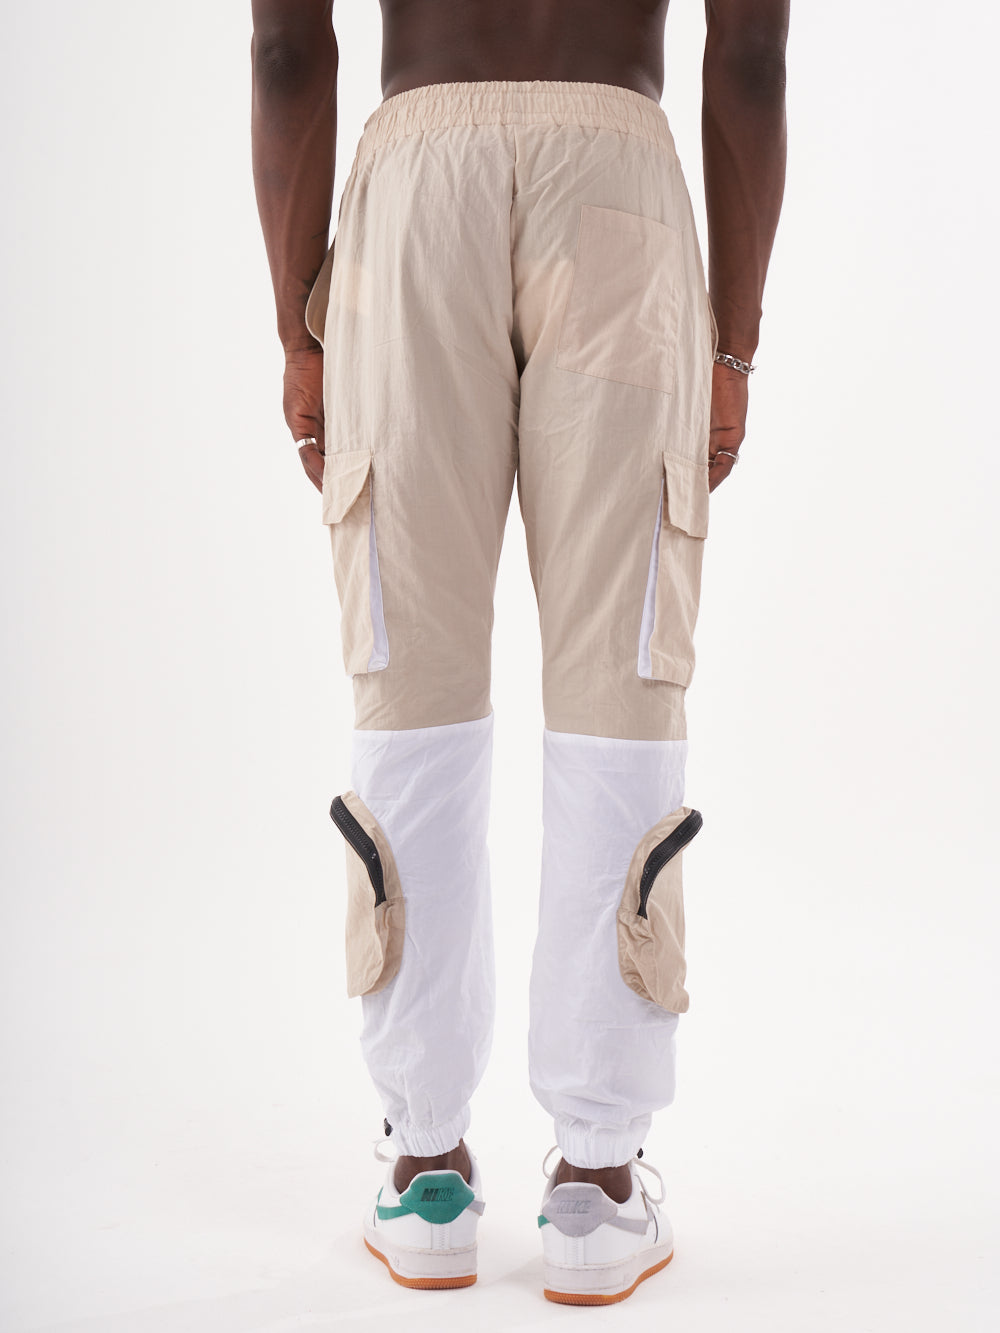 The back view of a man wearing RENEGADE | BEIGE cargo pants in beige and white.